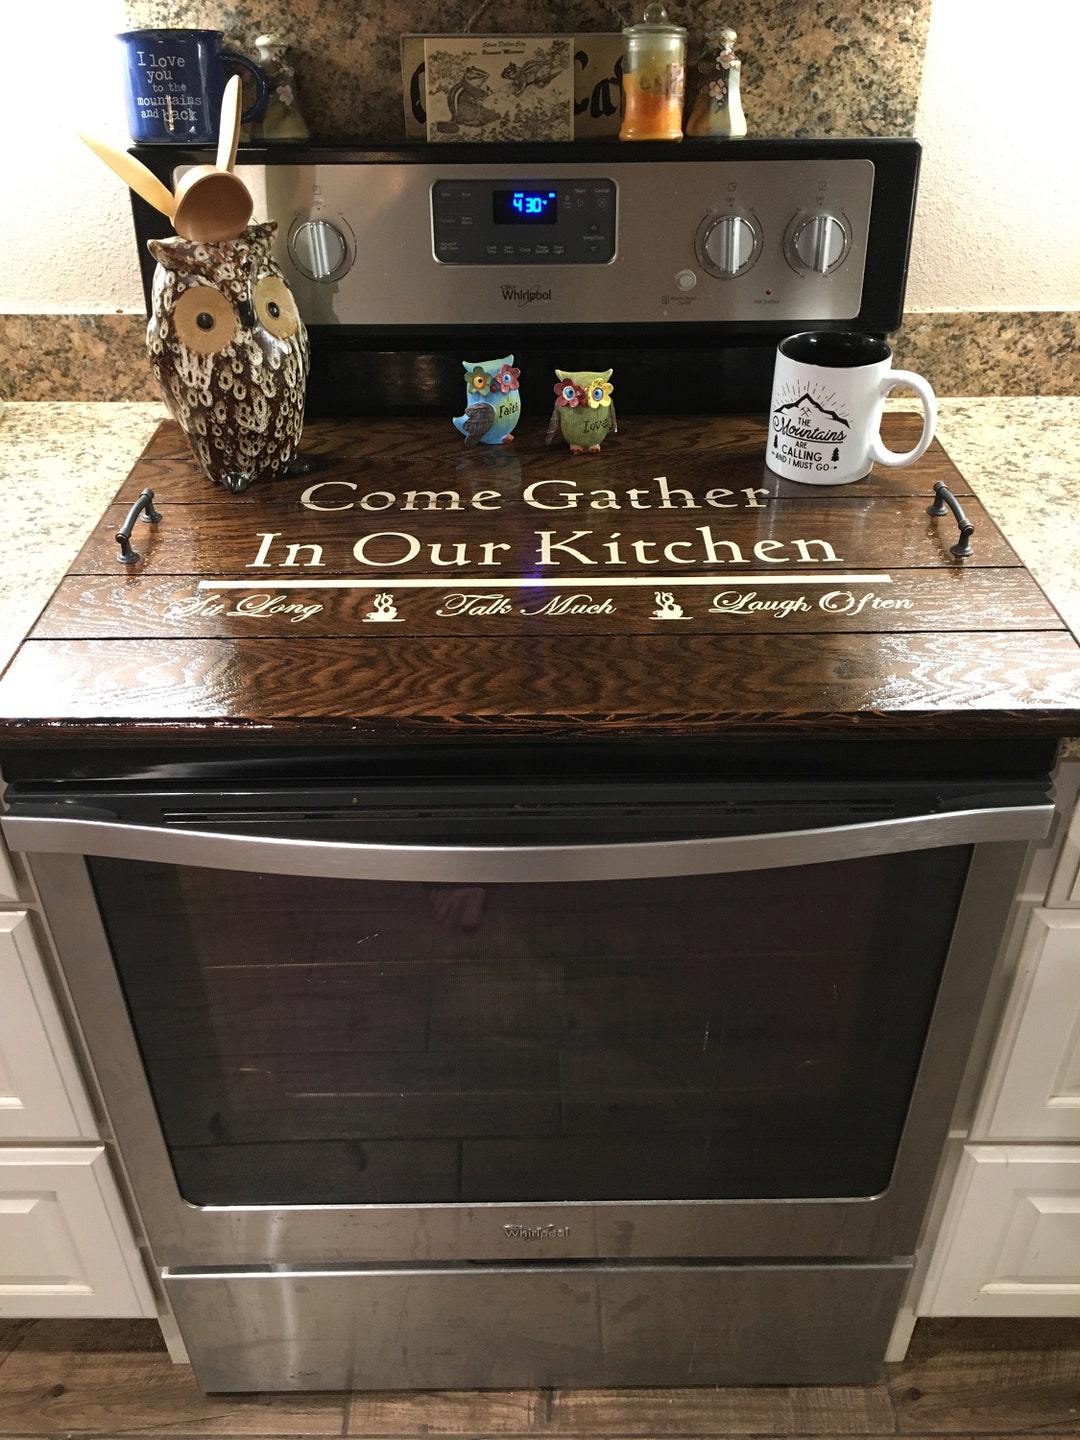  Noodle board, stove cover, serving tray, kitchen decor,  handmade, farmhouse style, farmhouse decor, personalized decor, wedding  gift, sink cover : Handmade Products